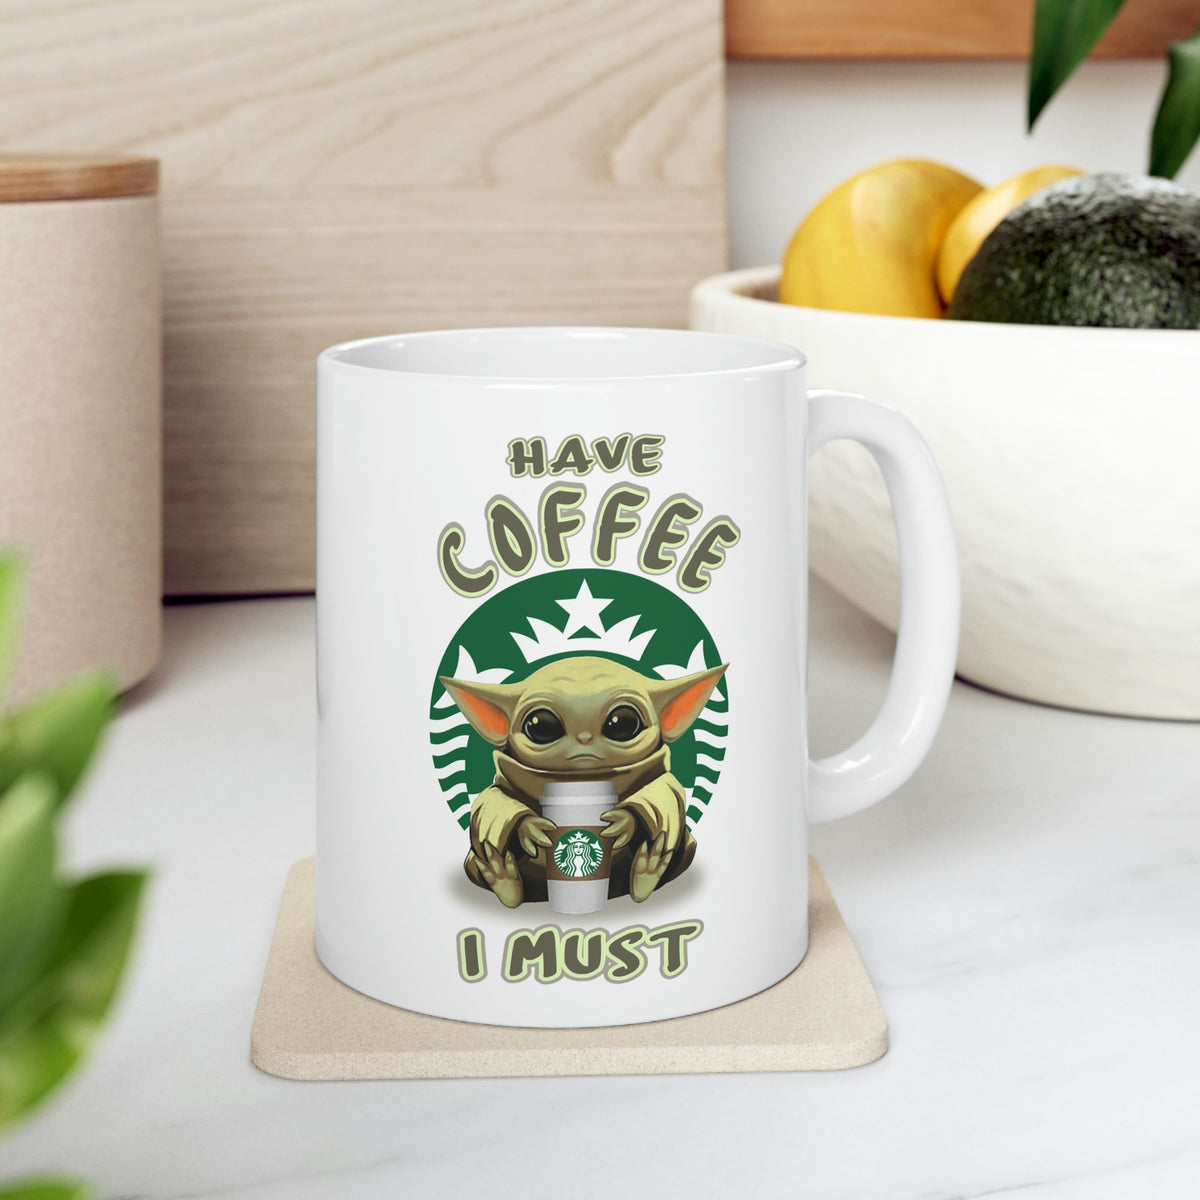 Have Coffee I Must - Yoda, Baby Yoda, Coffee Cup, Funny Cup